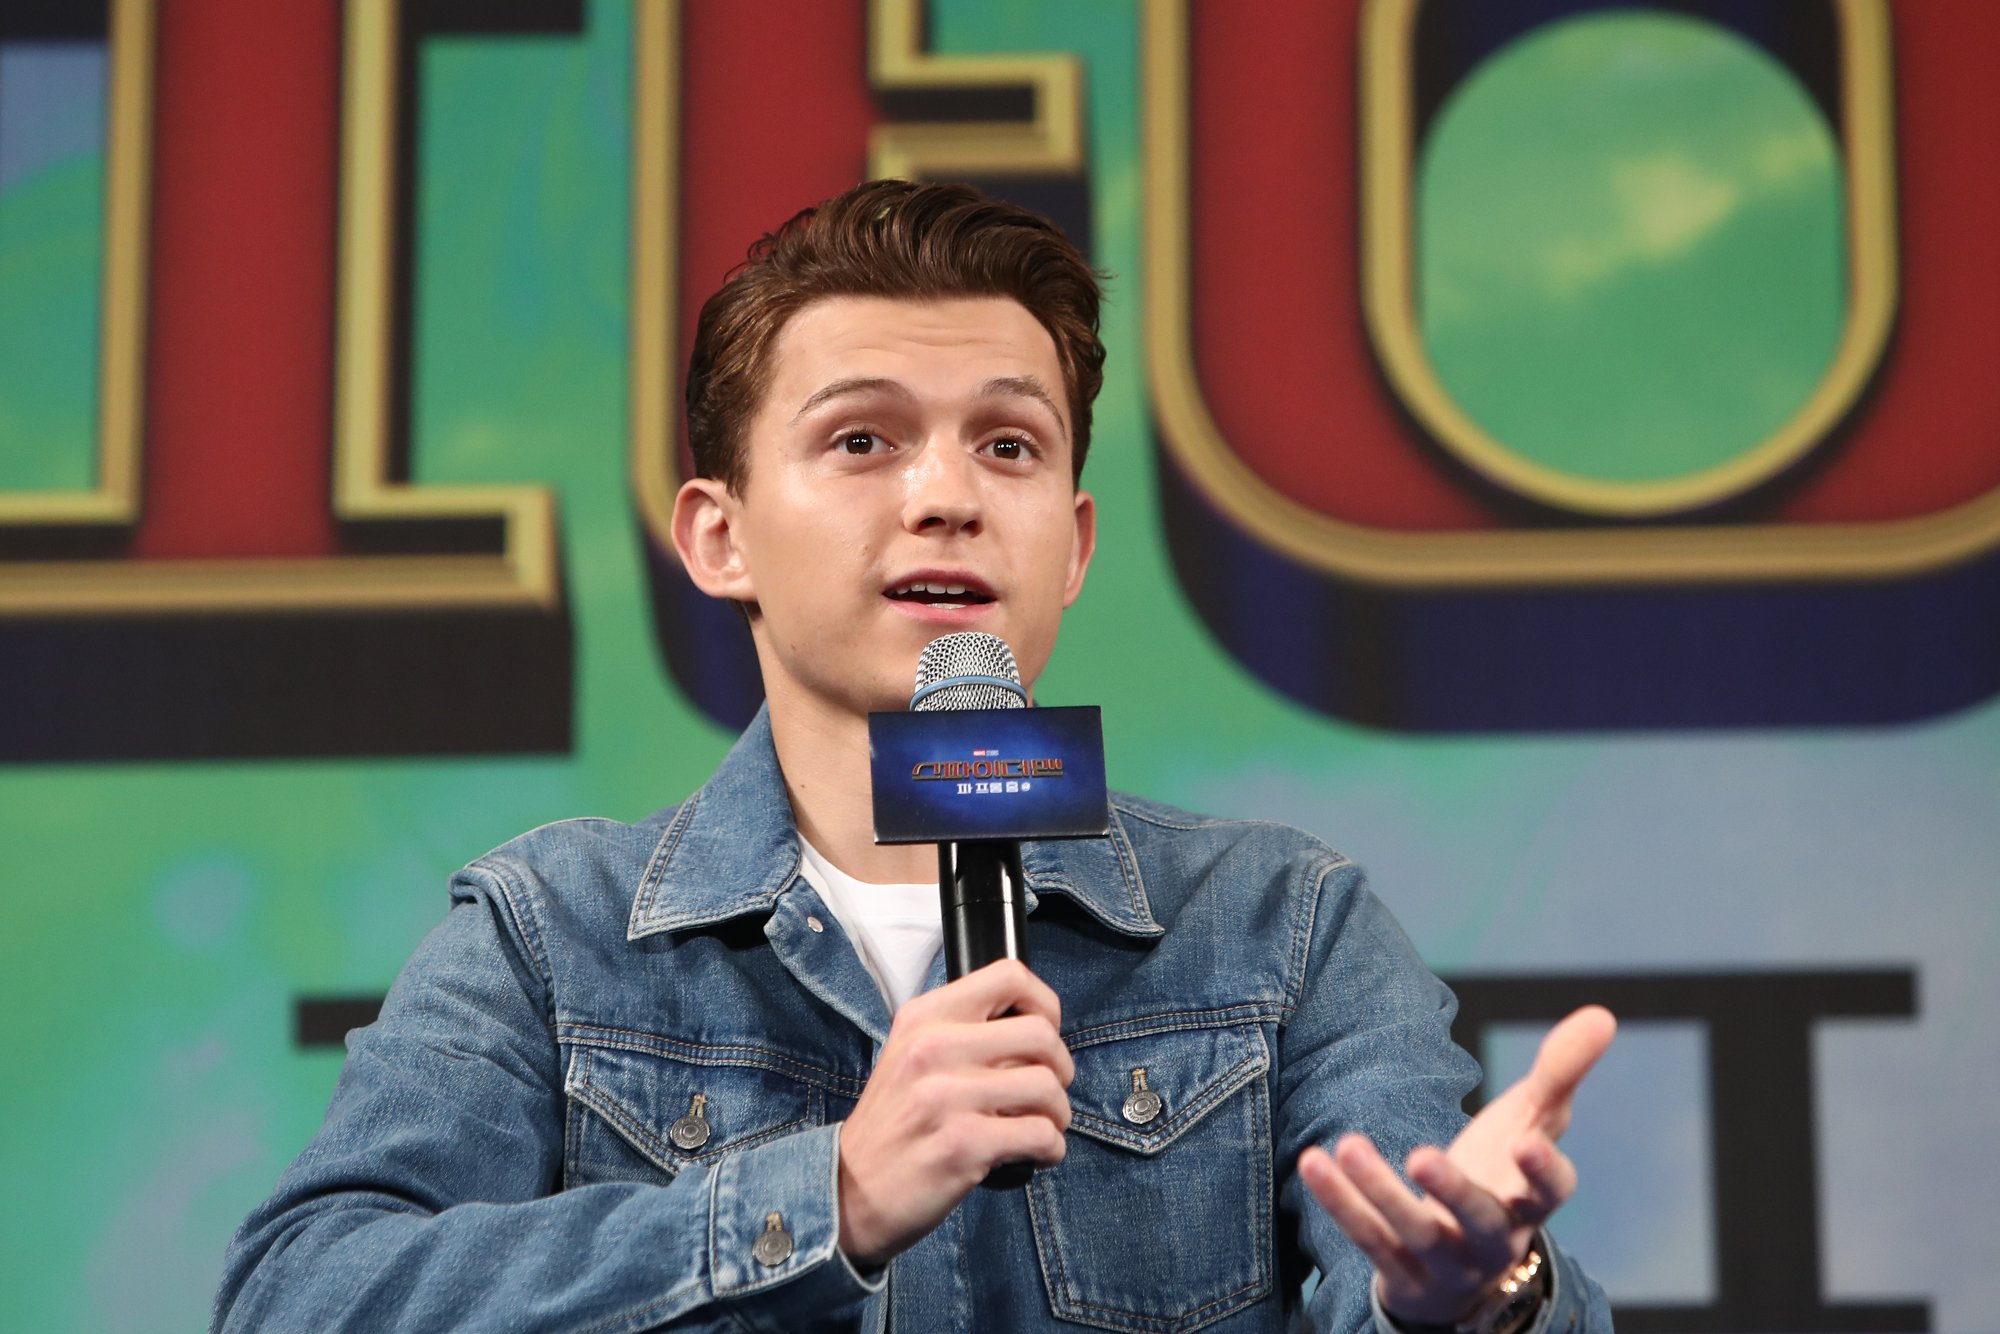 'Spider-Man: No Way Home' star Tom Holland, who will take on multiple villains in the upcoming film. He's sitting on a panel and speaking into a microphone.